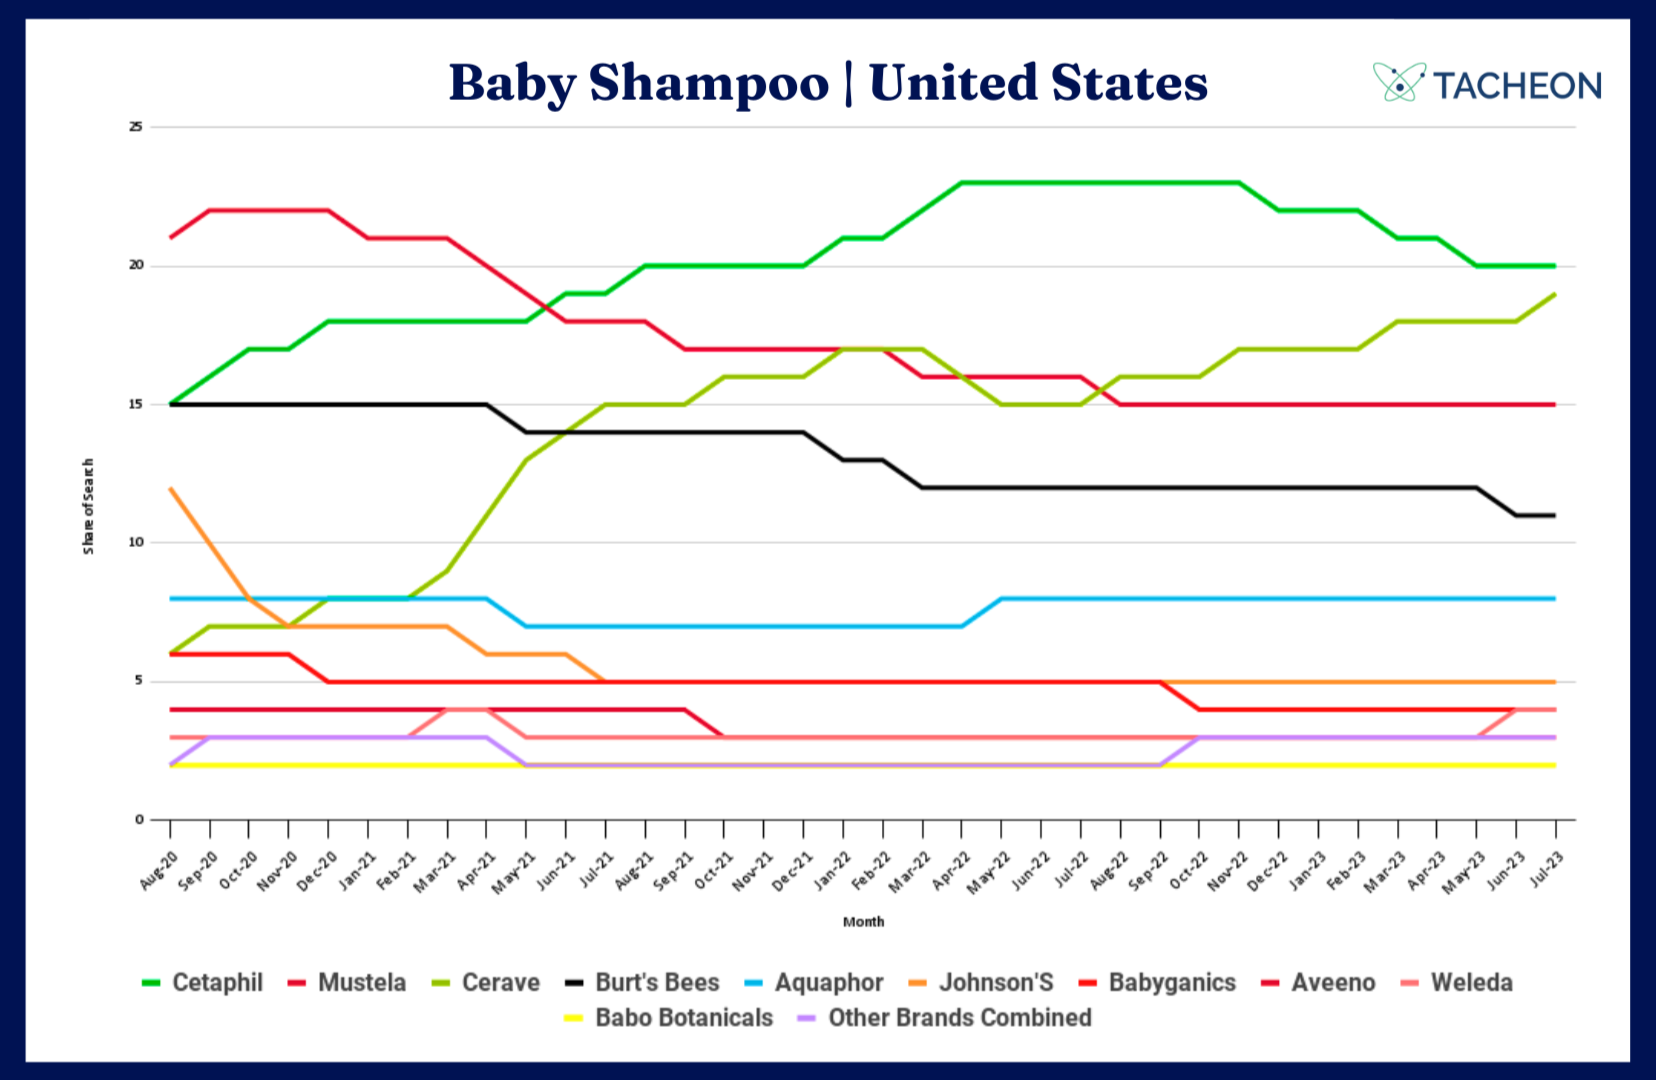 Share of Search Dashboard Baby Shampoo Category United States